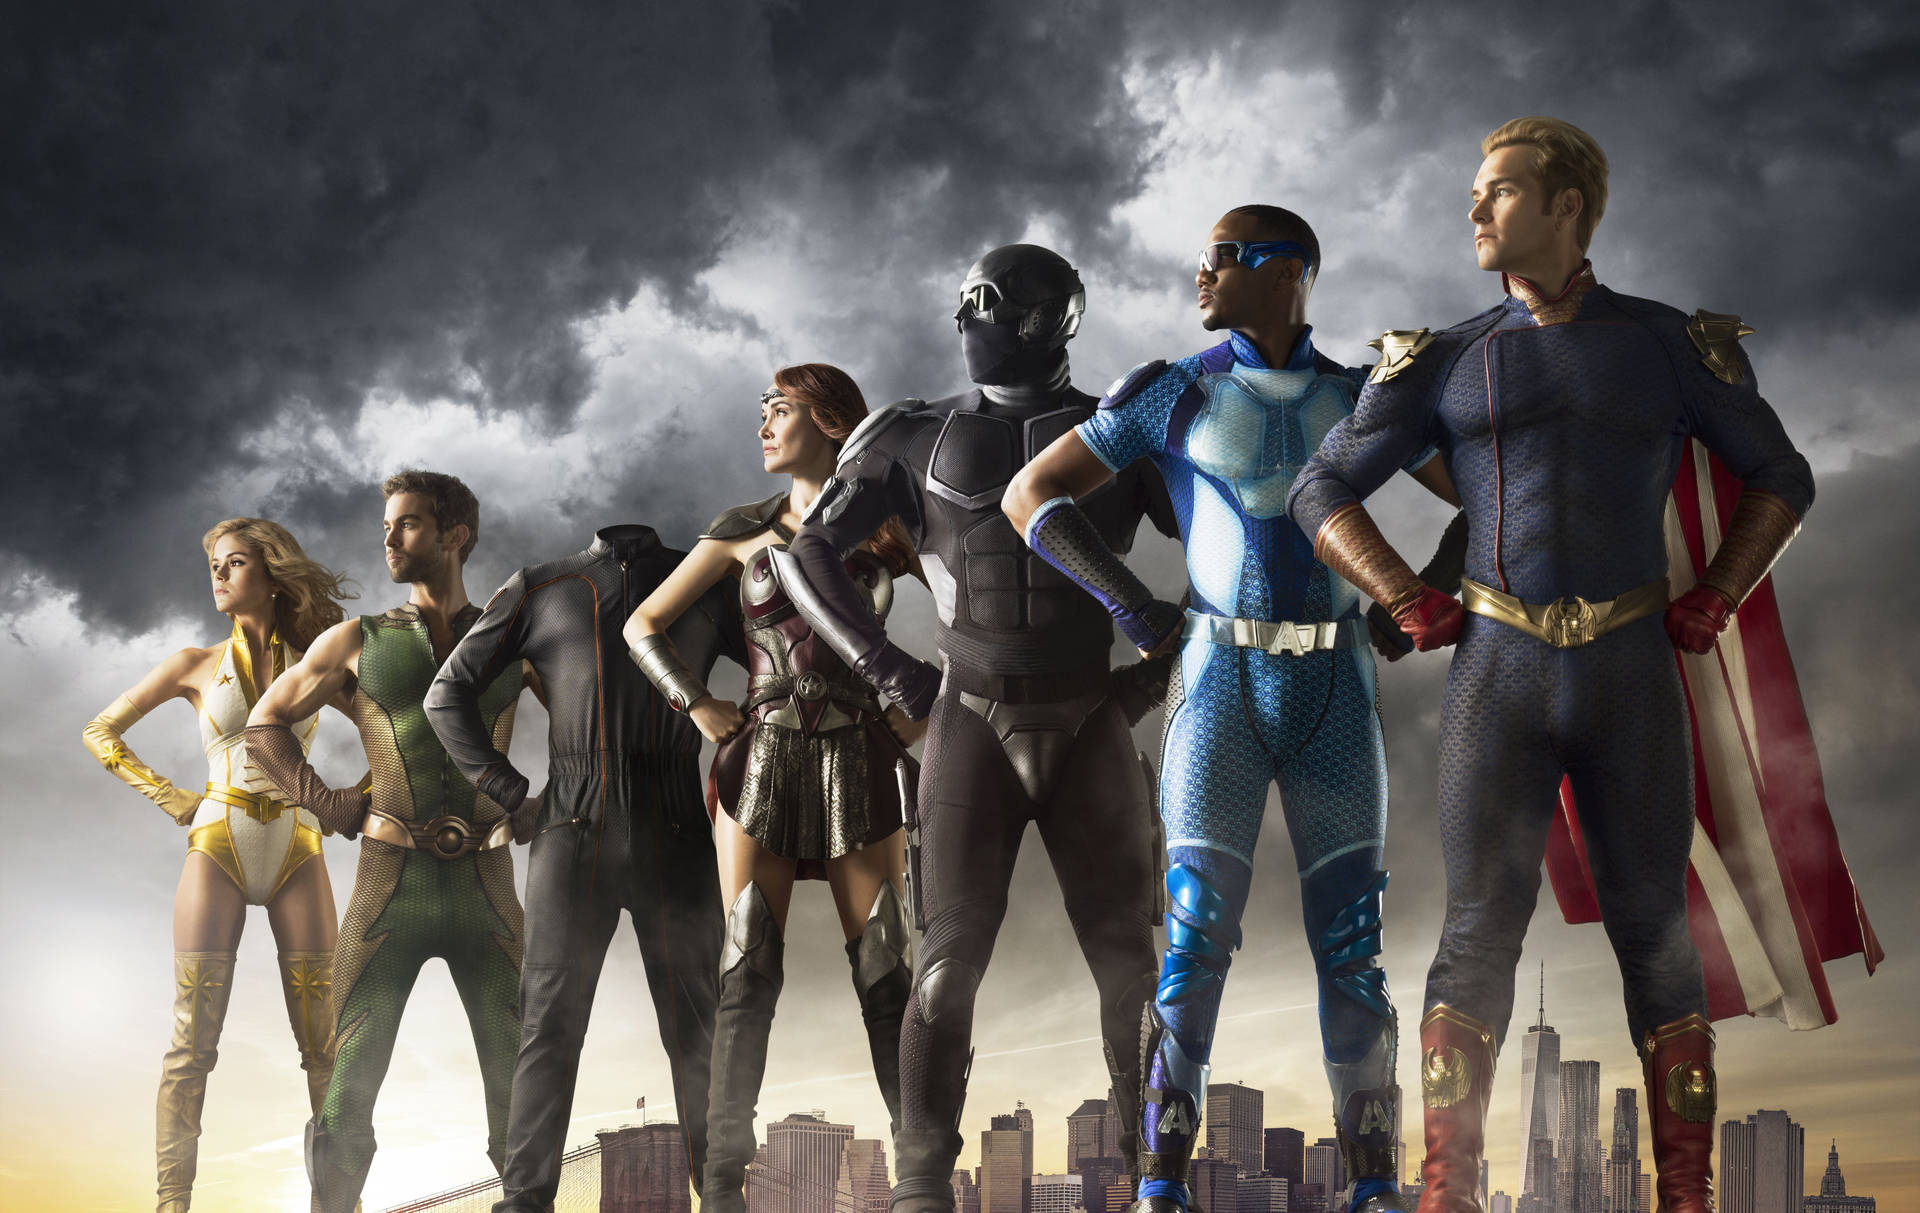 "Superheroes in action from the TV Show 'The Boys'" Wallpaper